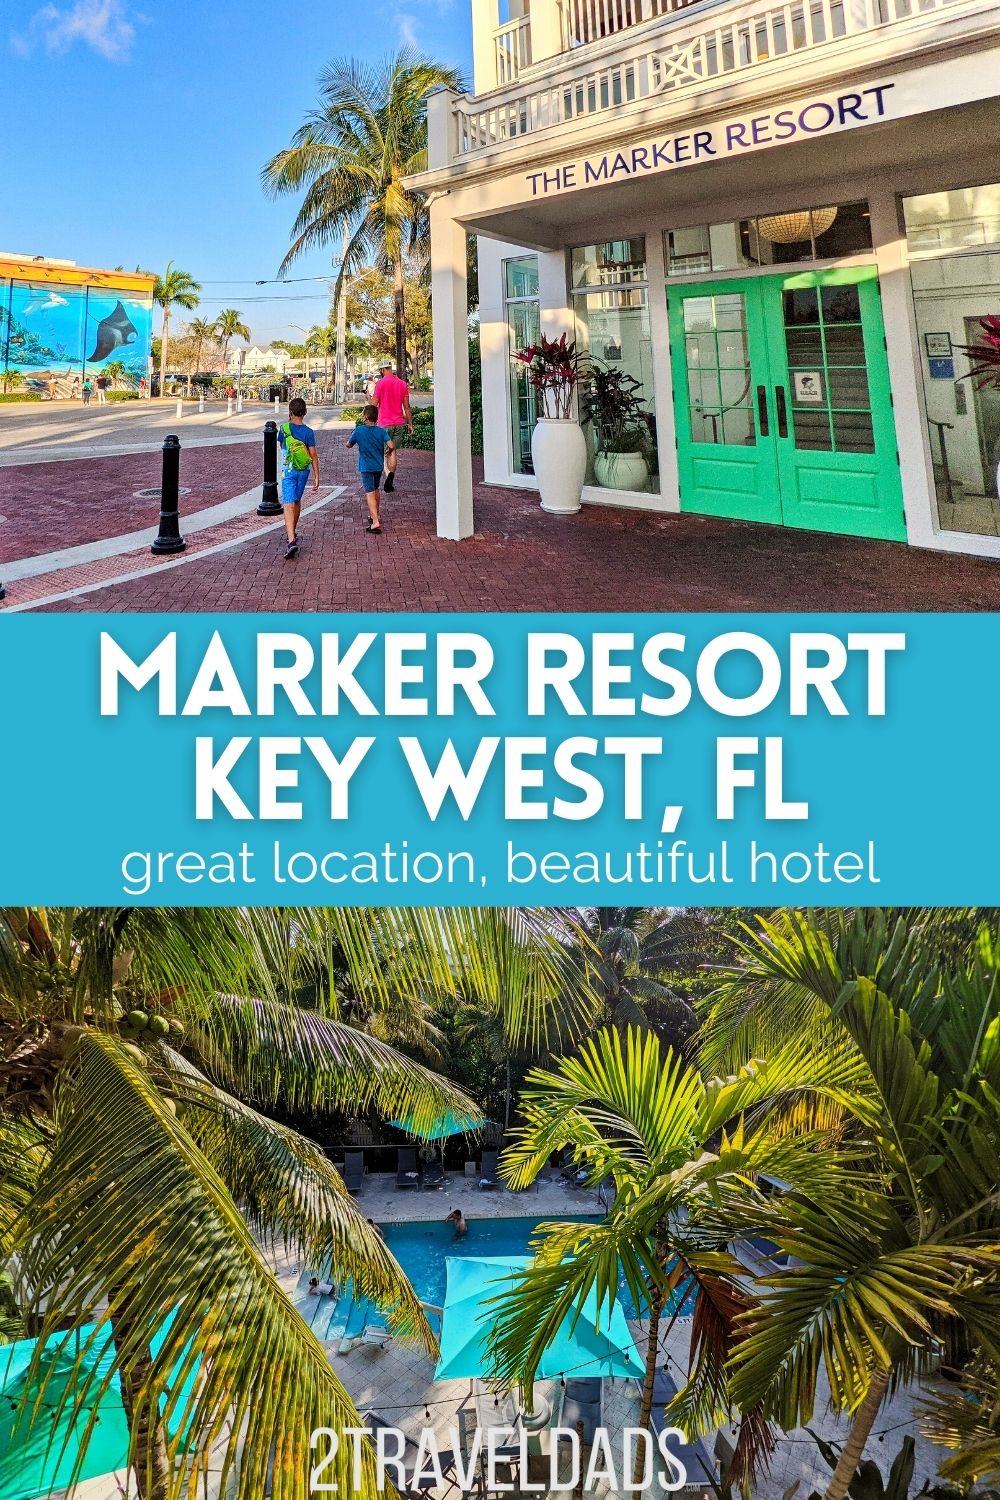 Review of the Marker Resort Hotel in Key West at the end of the Florida Keys. Get the details of this beautiful resort located in the Historic Seaport area of Key West, including rooms, dining and things to do nearby.